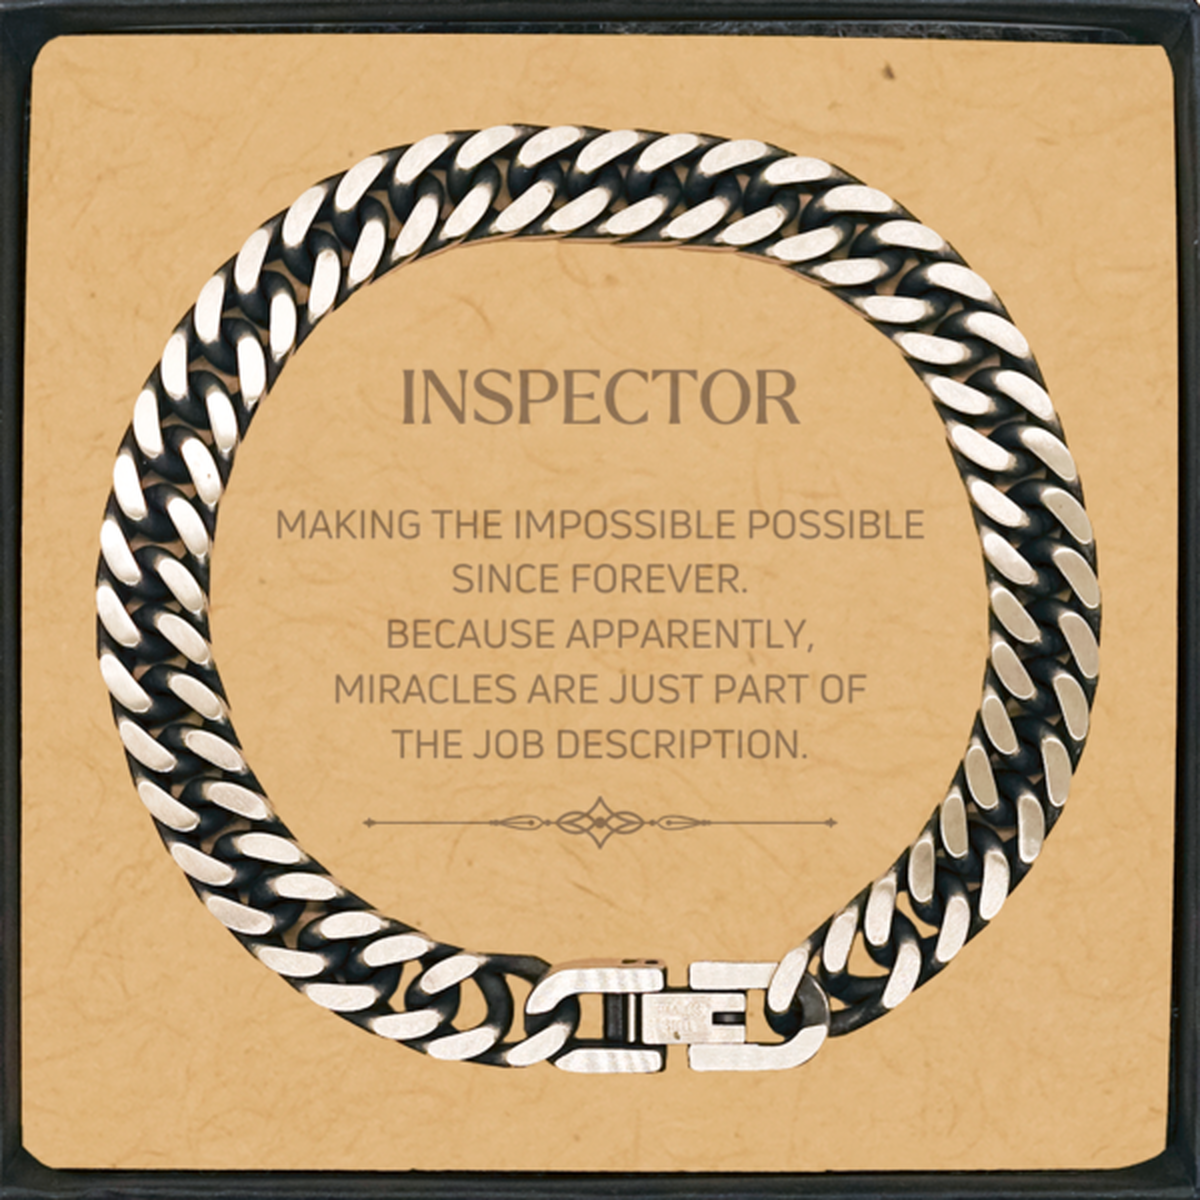 Funny Inspector Gifts, Miracles are just part of the job description, Inspirational Birthday Cuban Link Chain Bracelet For Inspector, Men, Women, Coworkers, Friends, Boss